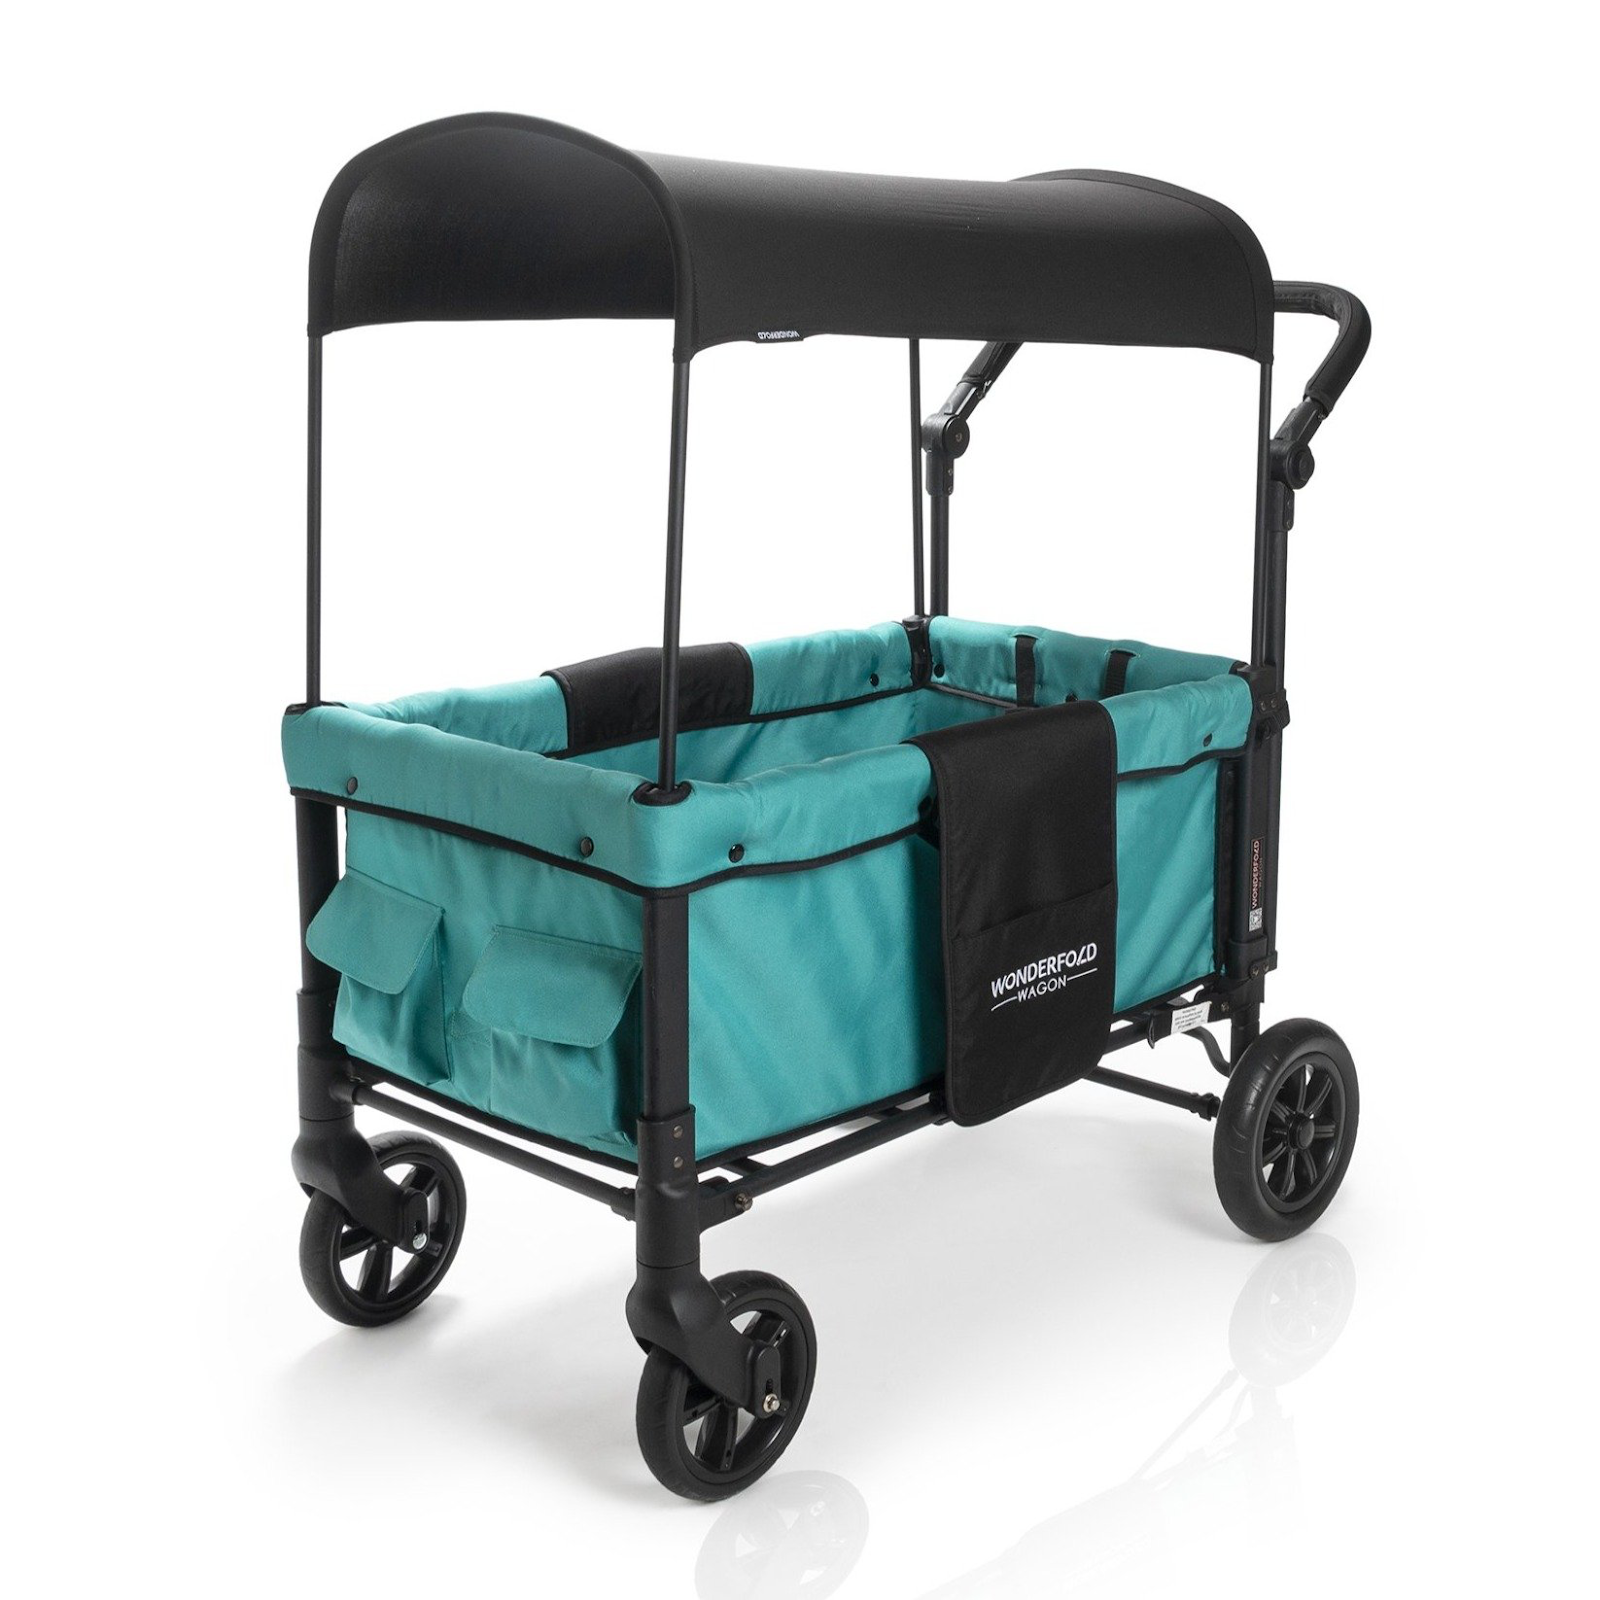 Wonderfold Wagon Review - Pros and Cons